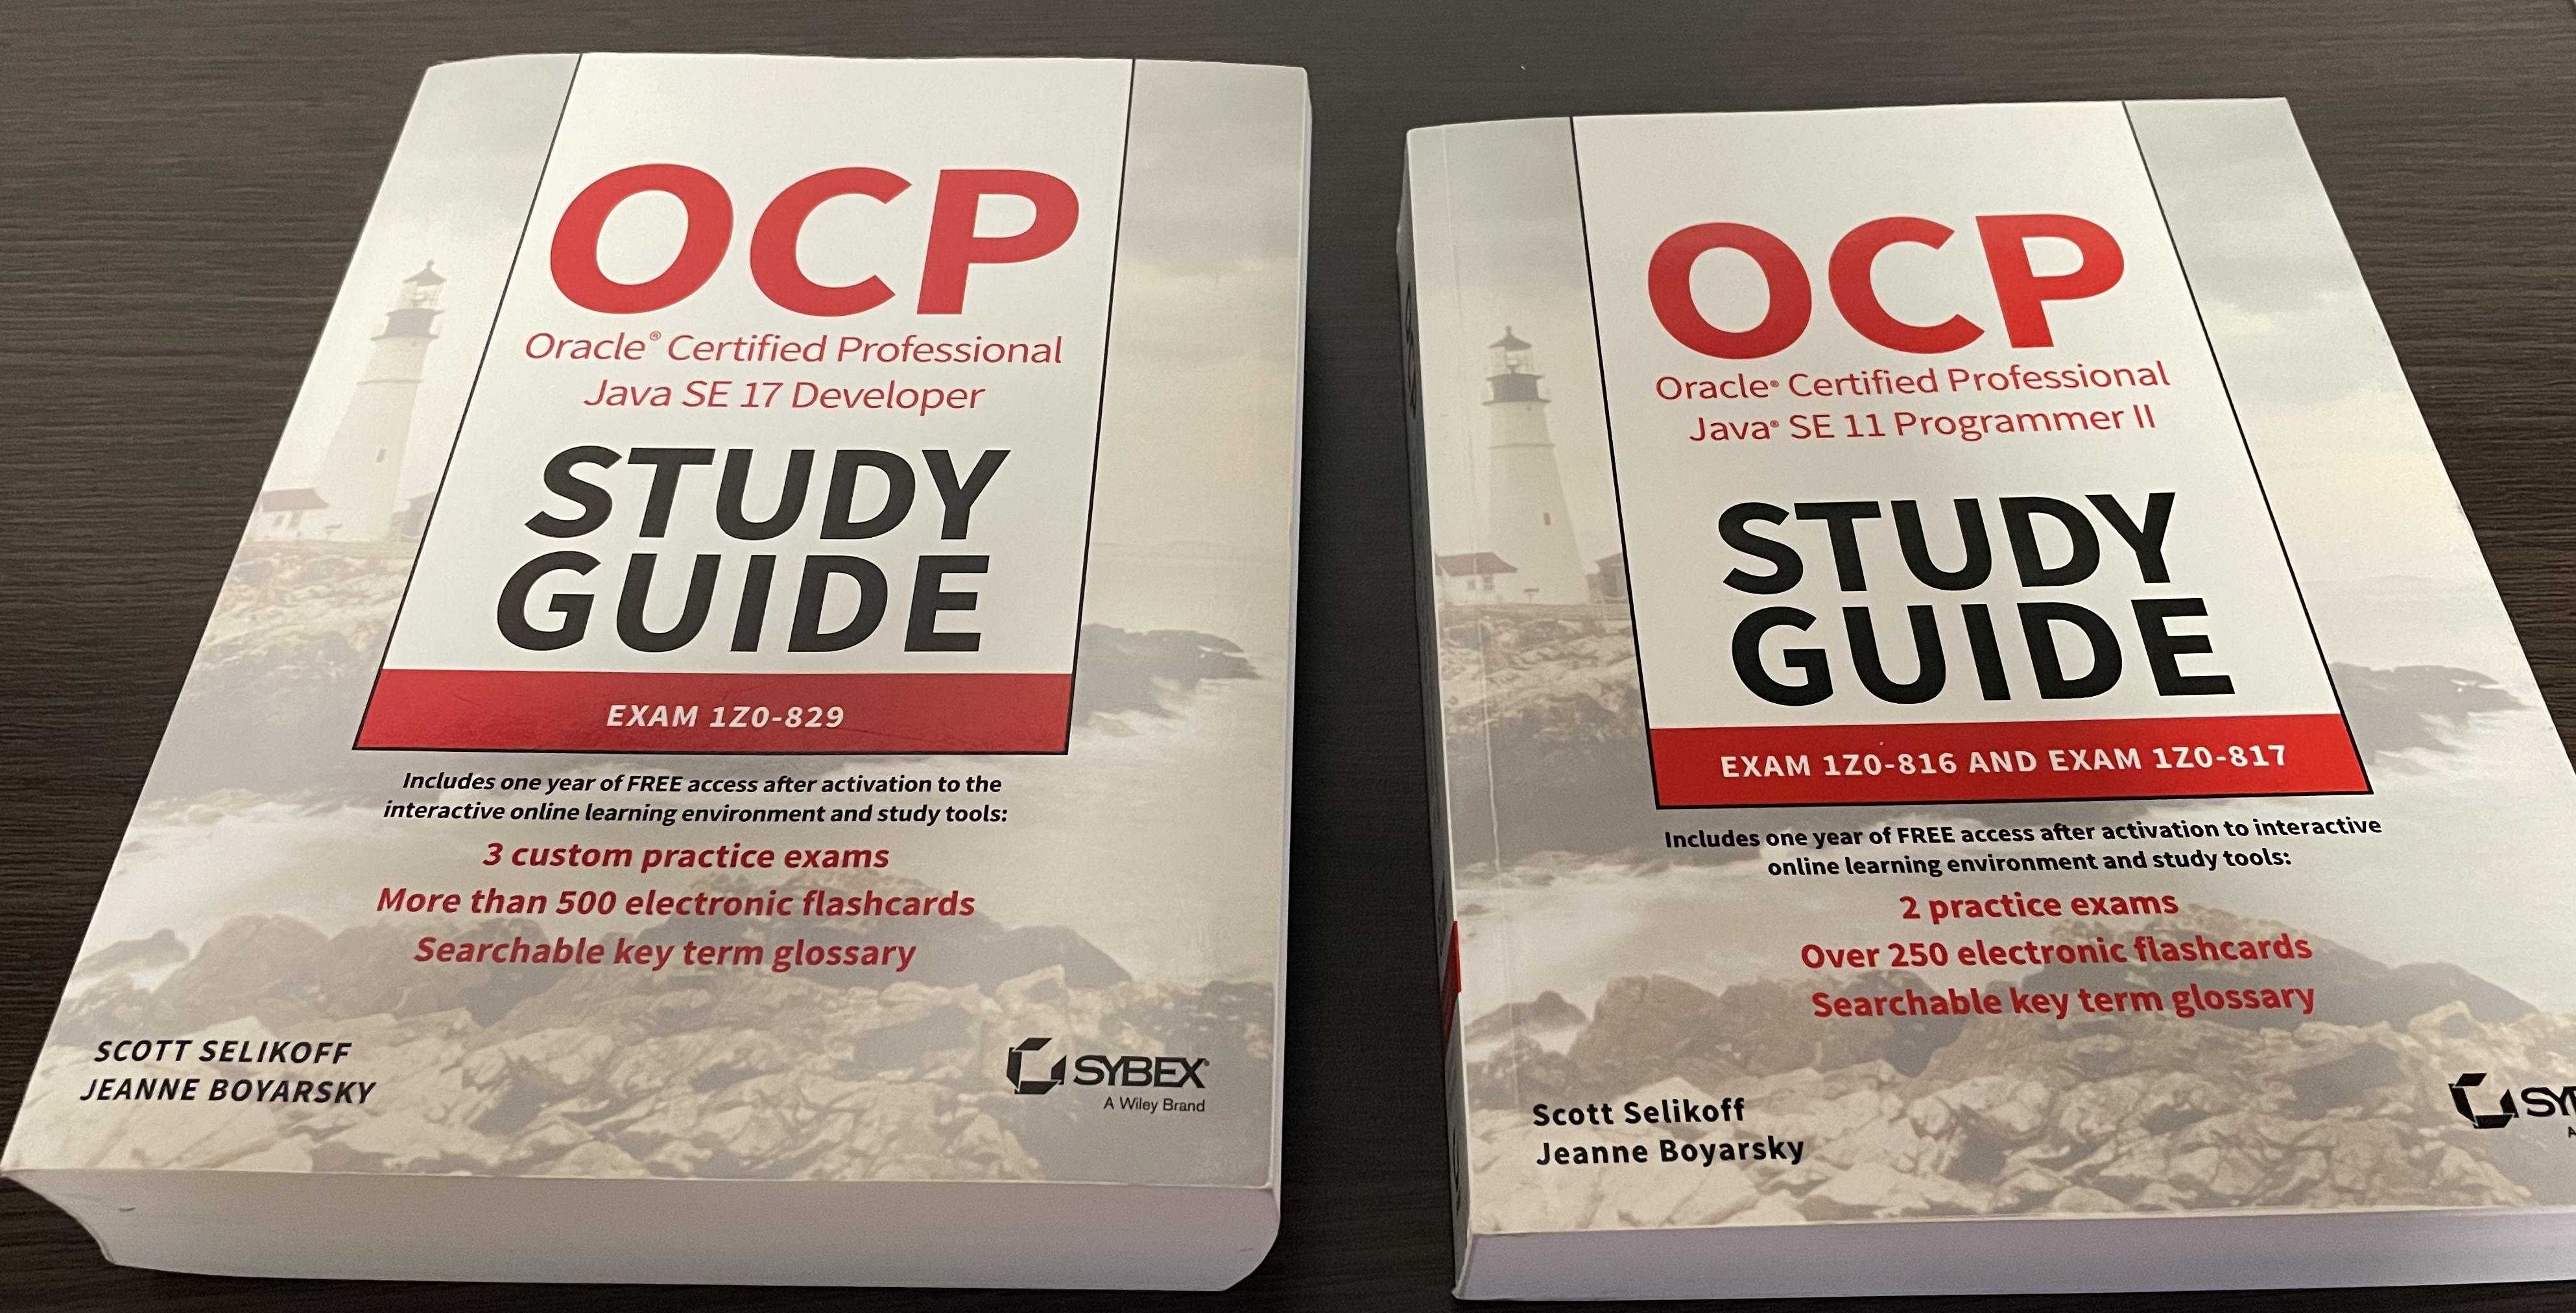 OCP Oracle Certified Professional Java SE Developer Study Guide books